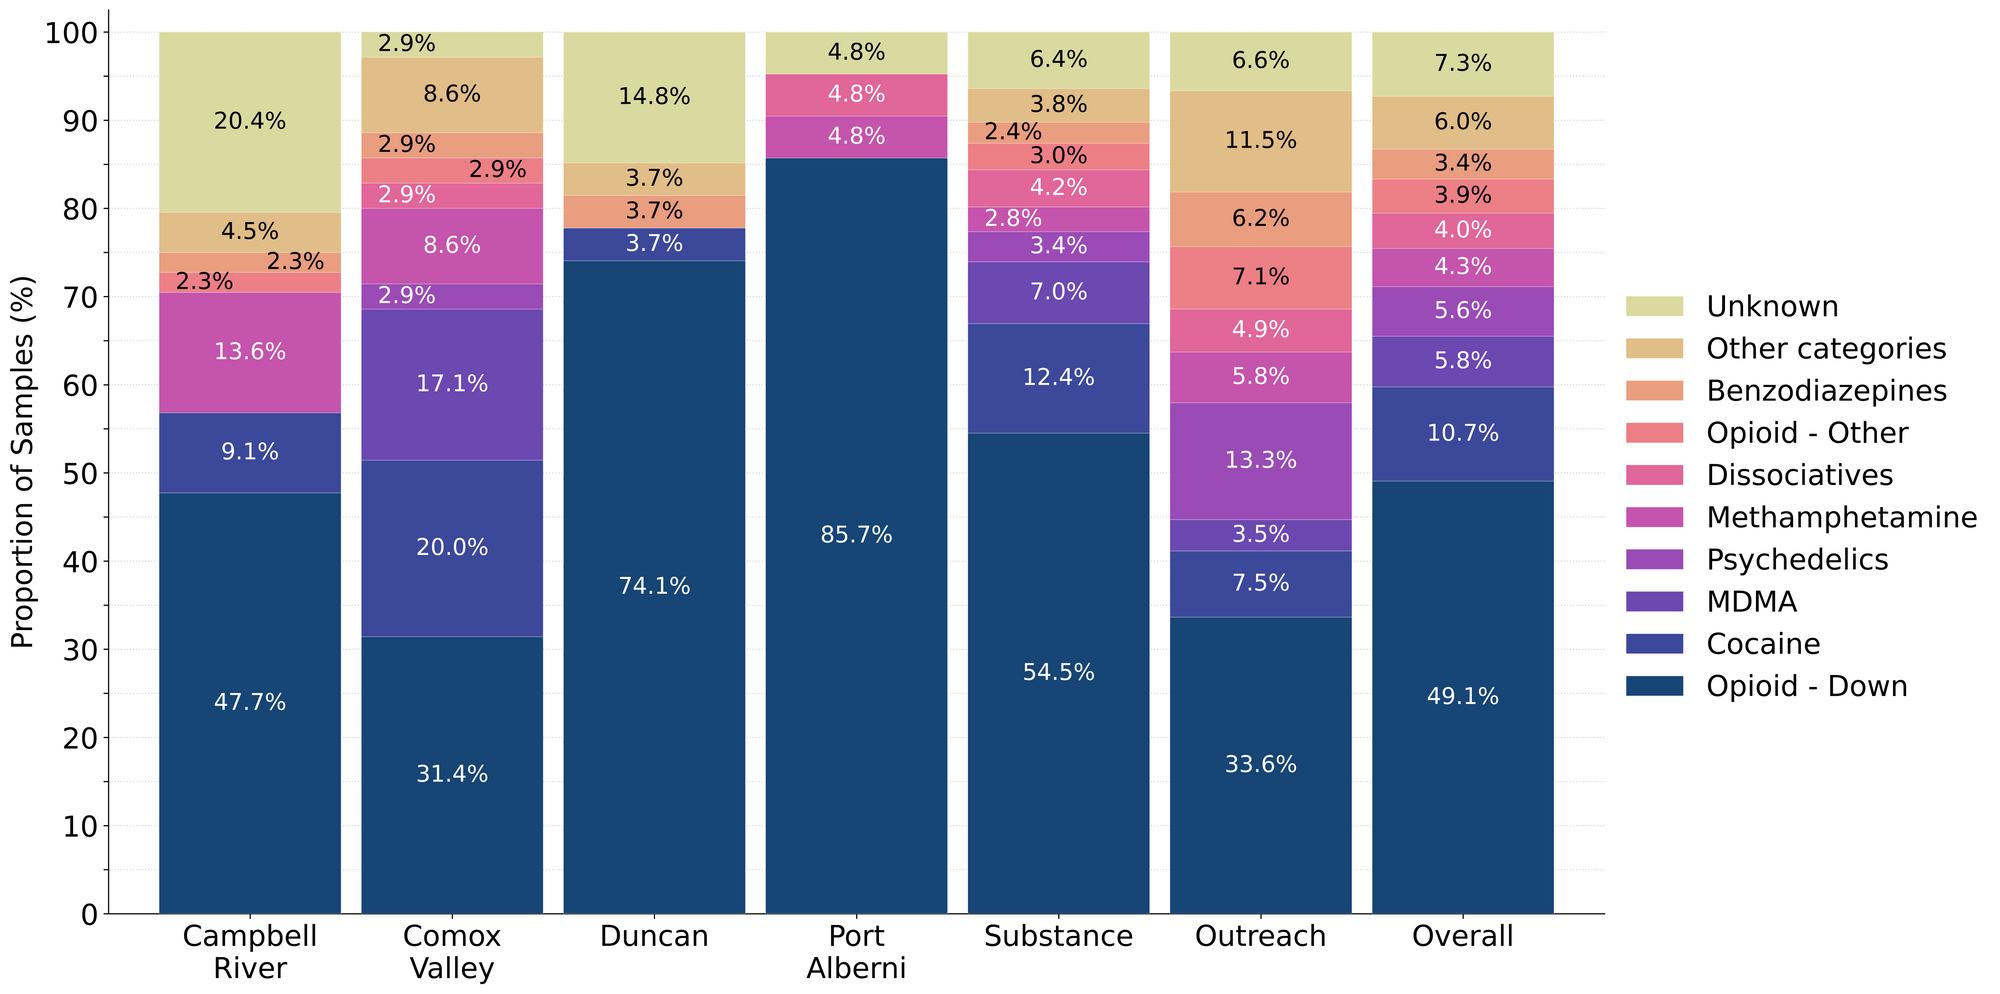 Figure 1. Prevalence of drug classes checked during April split by sample collection/method. Bars are stacked by the percentage of samples in each drug class, with the individual percentages overlaid. Drug classes which represent less than 1% of a given location’s total do not have their percent overlaid onto the bar.